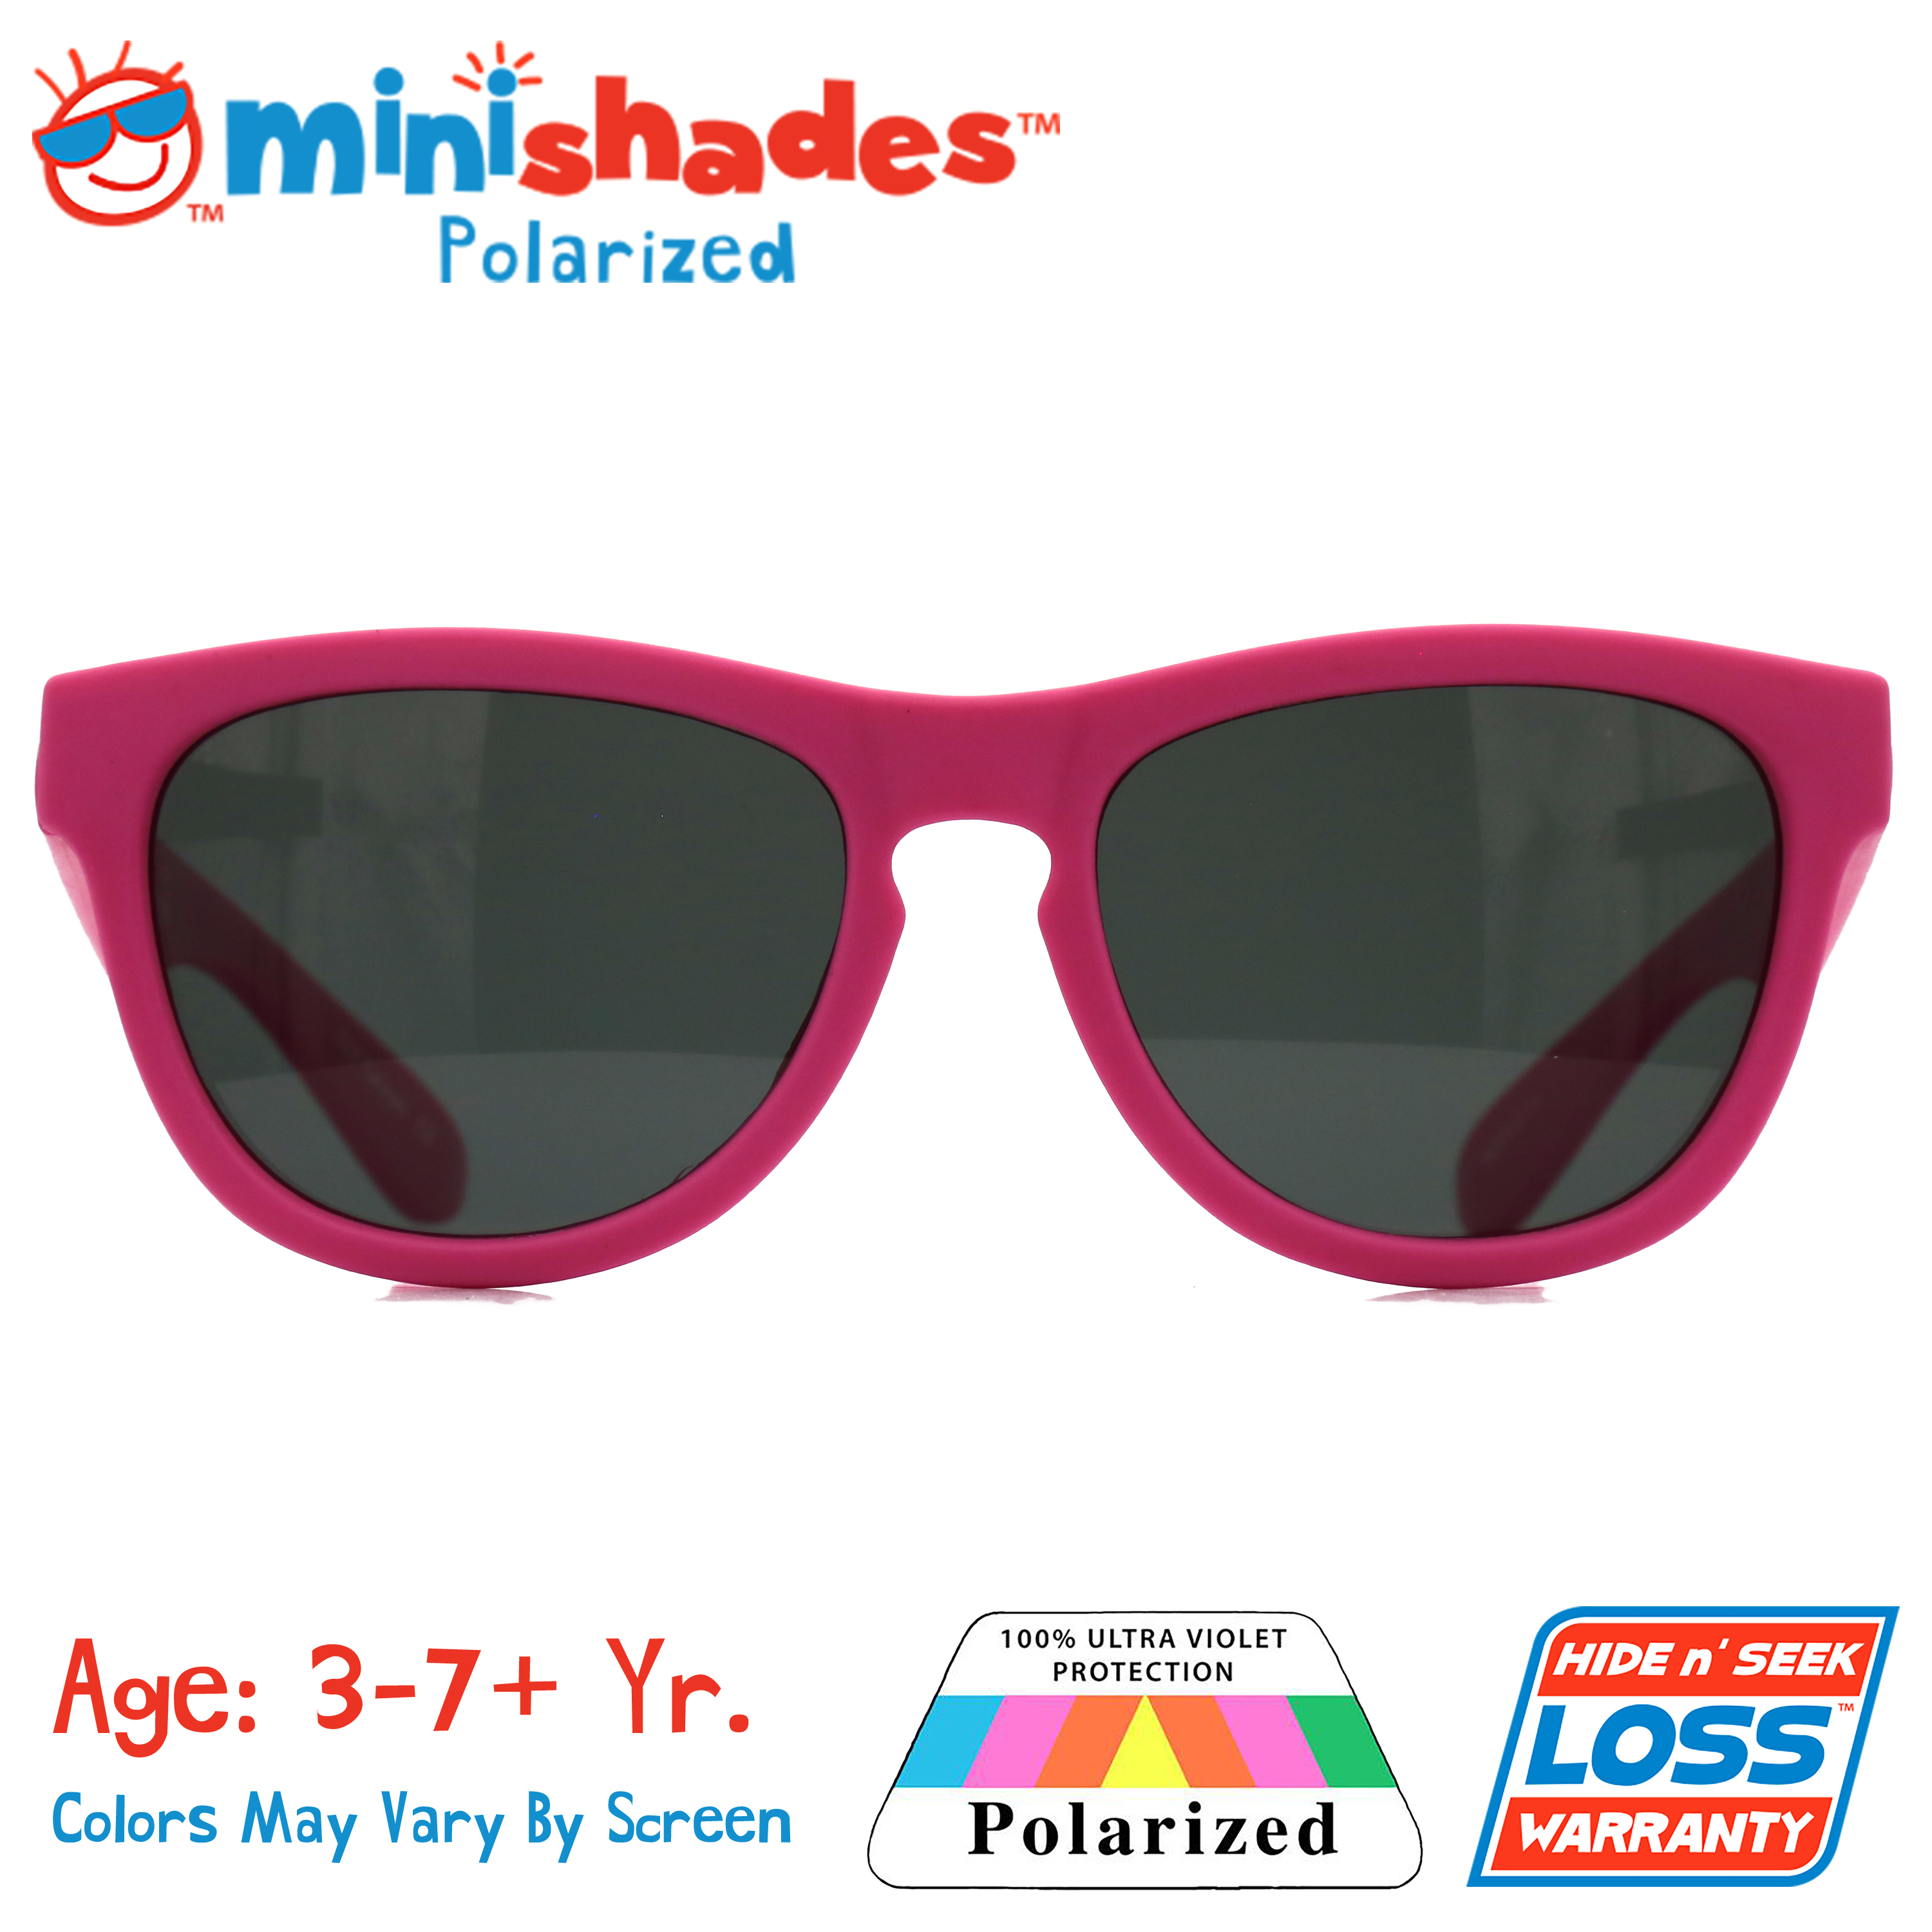 Minishades Polarized: Flexible Kids Sunglasses - Hot Pink |UVA/UVB| Hide n' Seek Replacement | Age: 3-7+Yr. - image 2 of 4